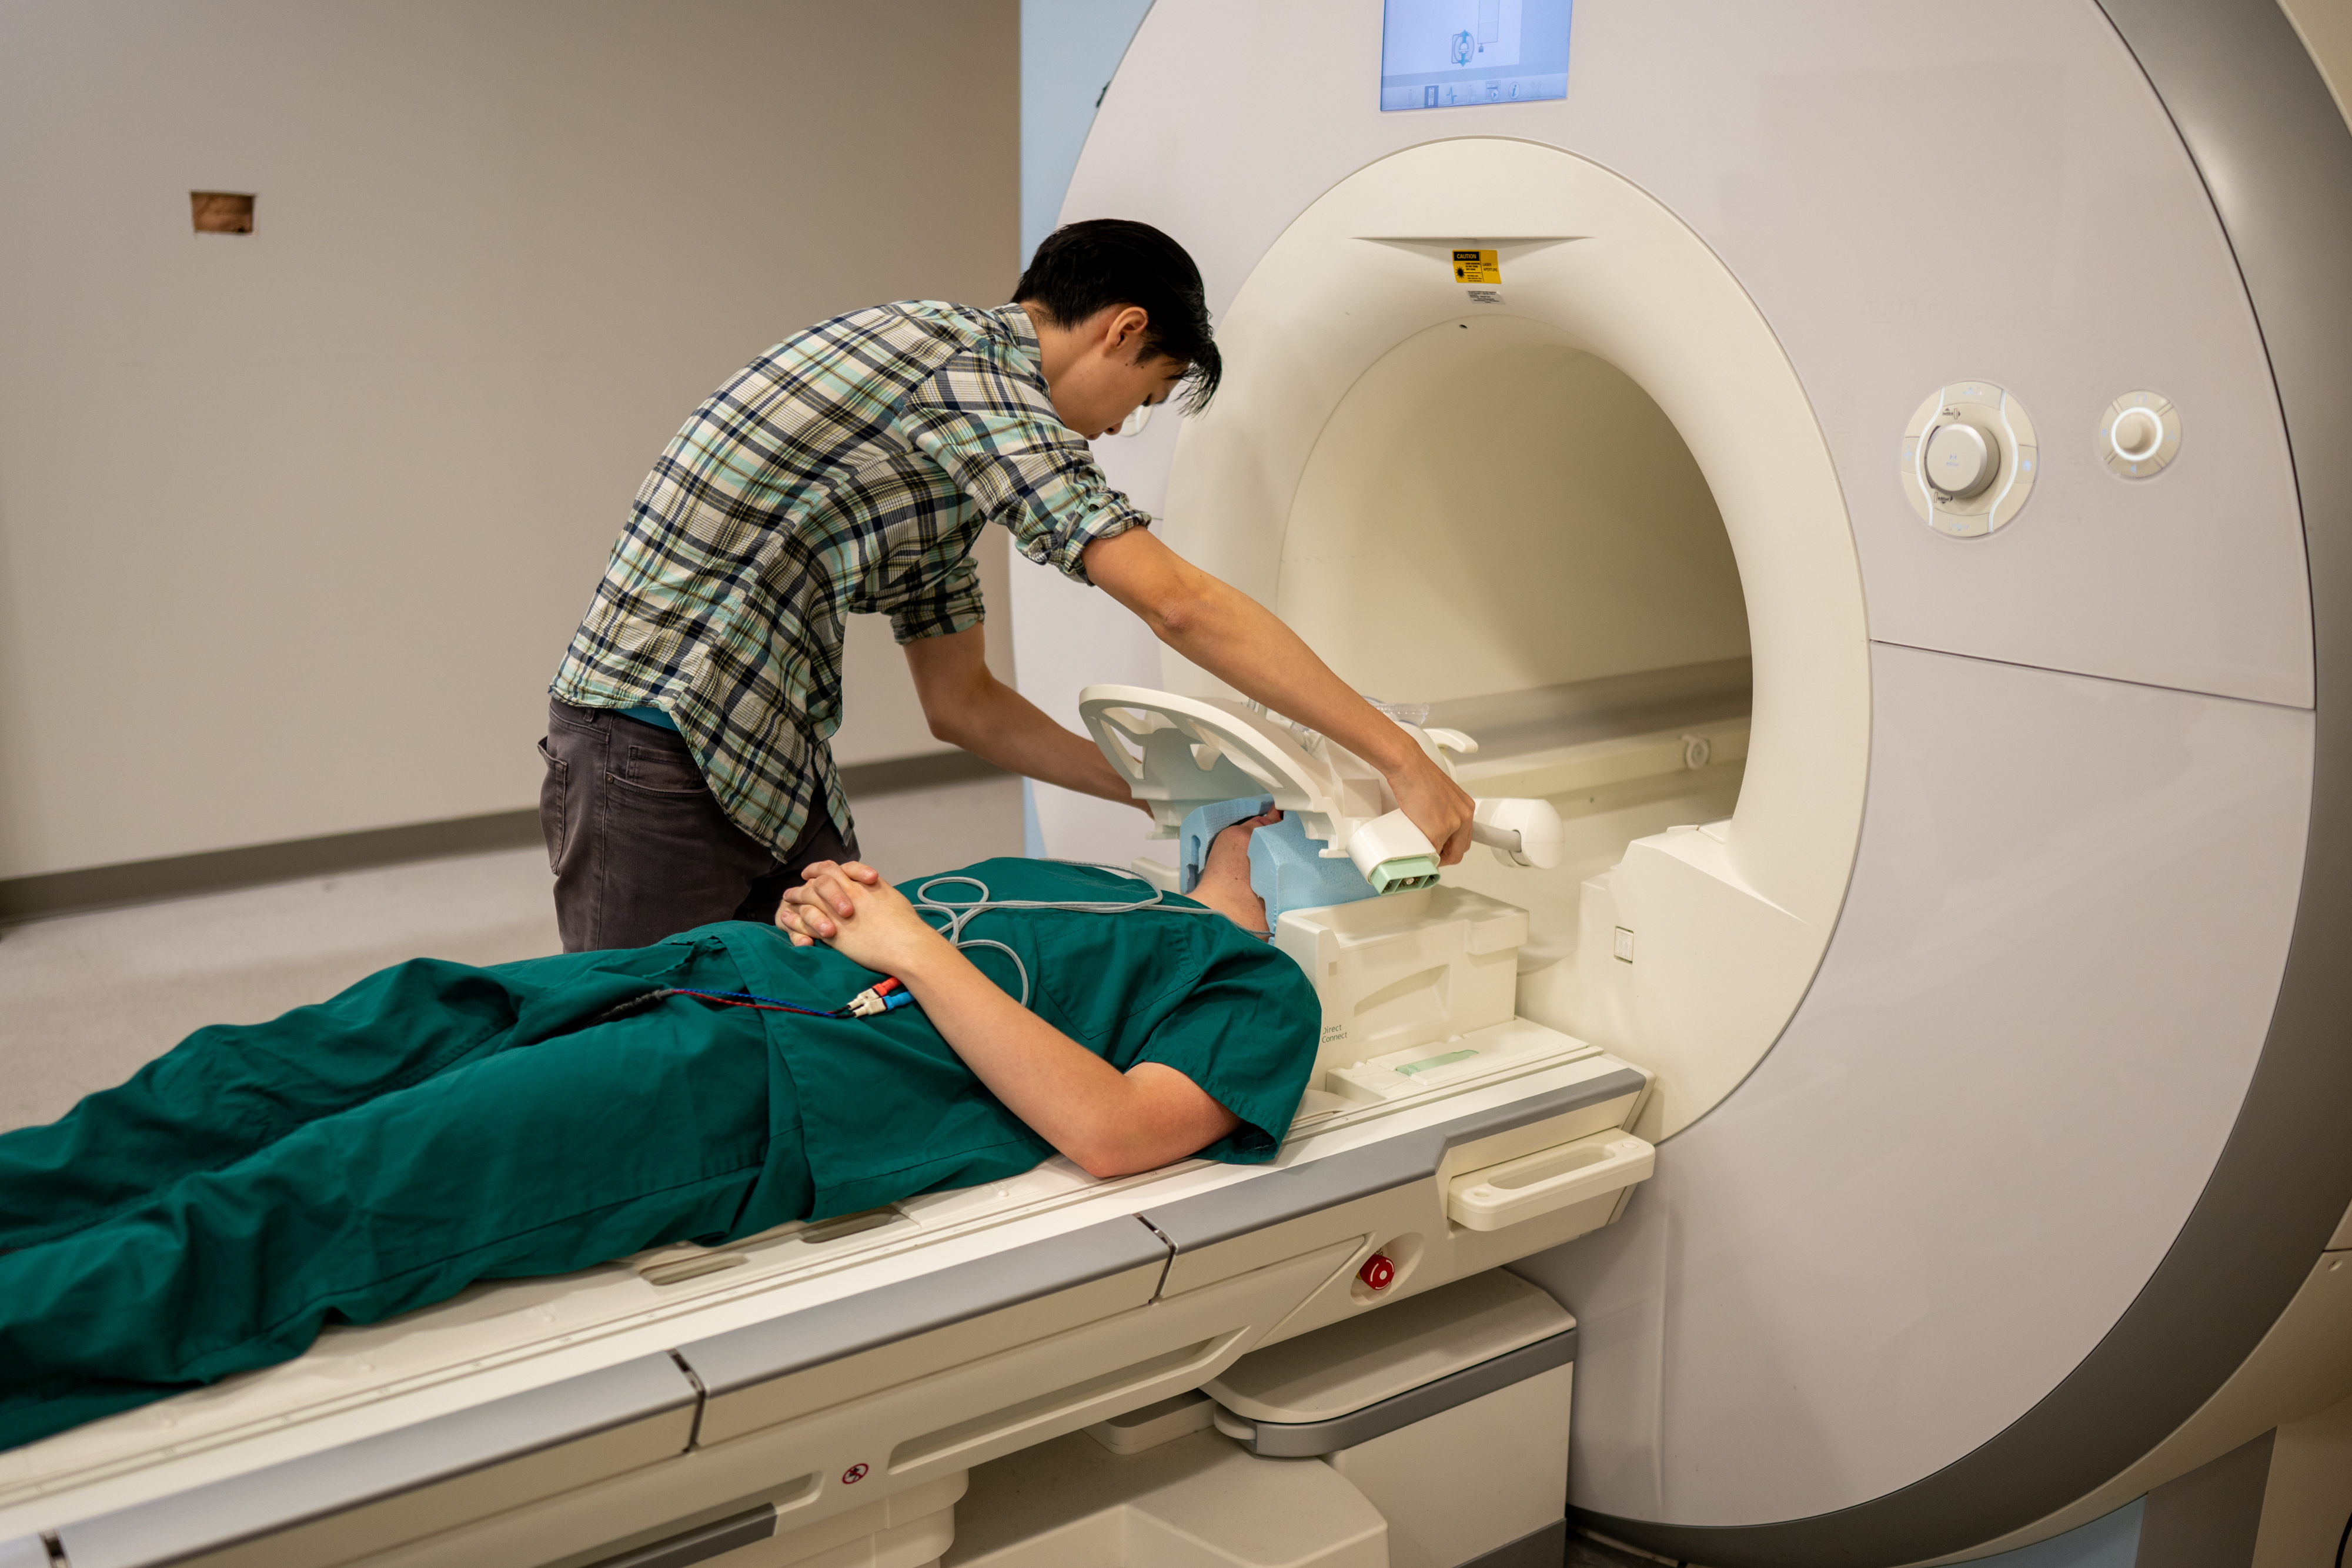 Ph.D. student Jerry Tang prepares to collect brain activity data in the Biomedical Imaging Center at the University of Texas at Austin. The researchers trained their semantic decoder on dozens of hours of brain activity data from participants, collected in an FMRI scanner. Image: Nolan Zunk/University of Texas at Austin.